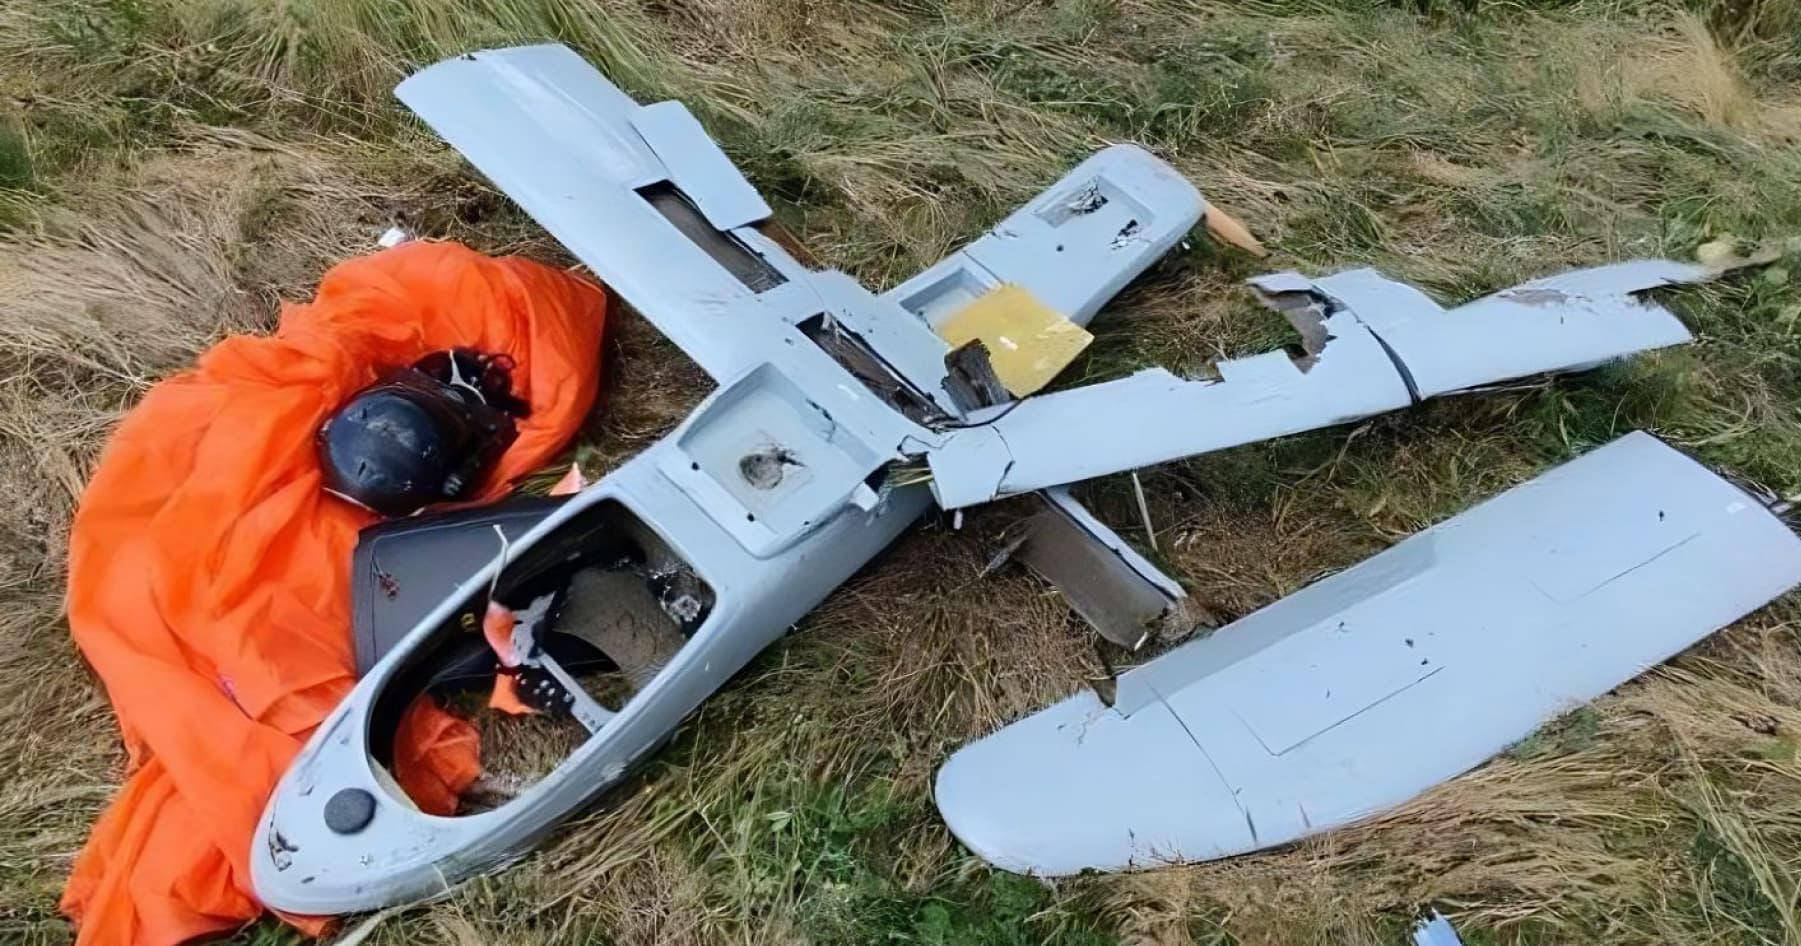 The Ukrainian military shot down seven Russian drones in one day, according to the  Command of the Air Assault forces of the Armed Forces of Ukraine.